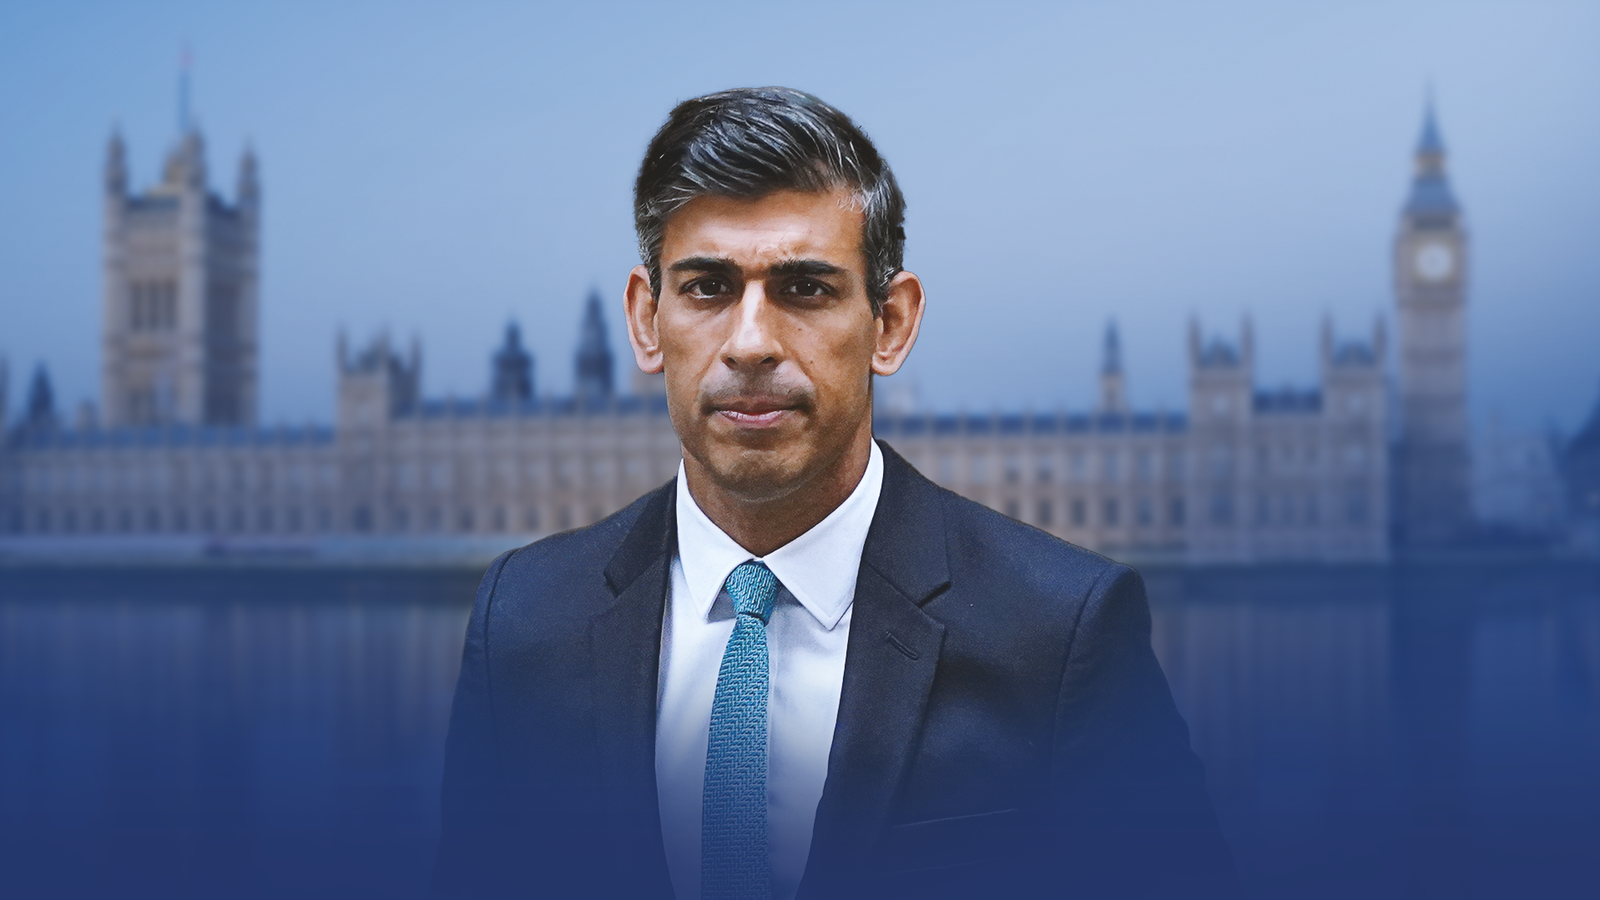 The Tories are struggling in the polls. Can Team Rishi turn things around before the next election?